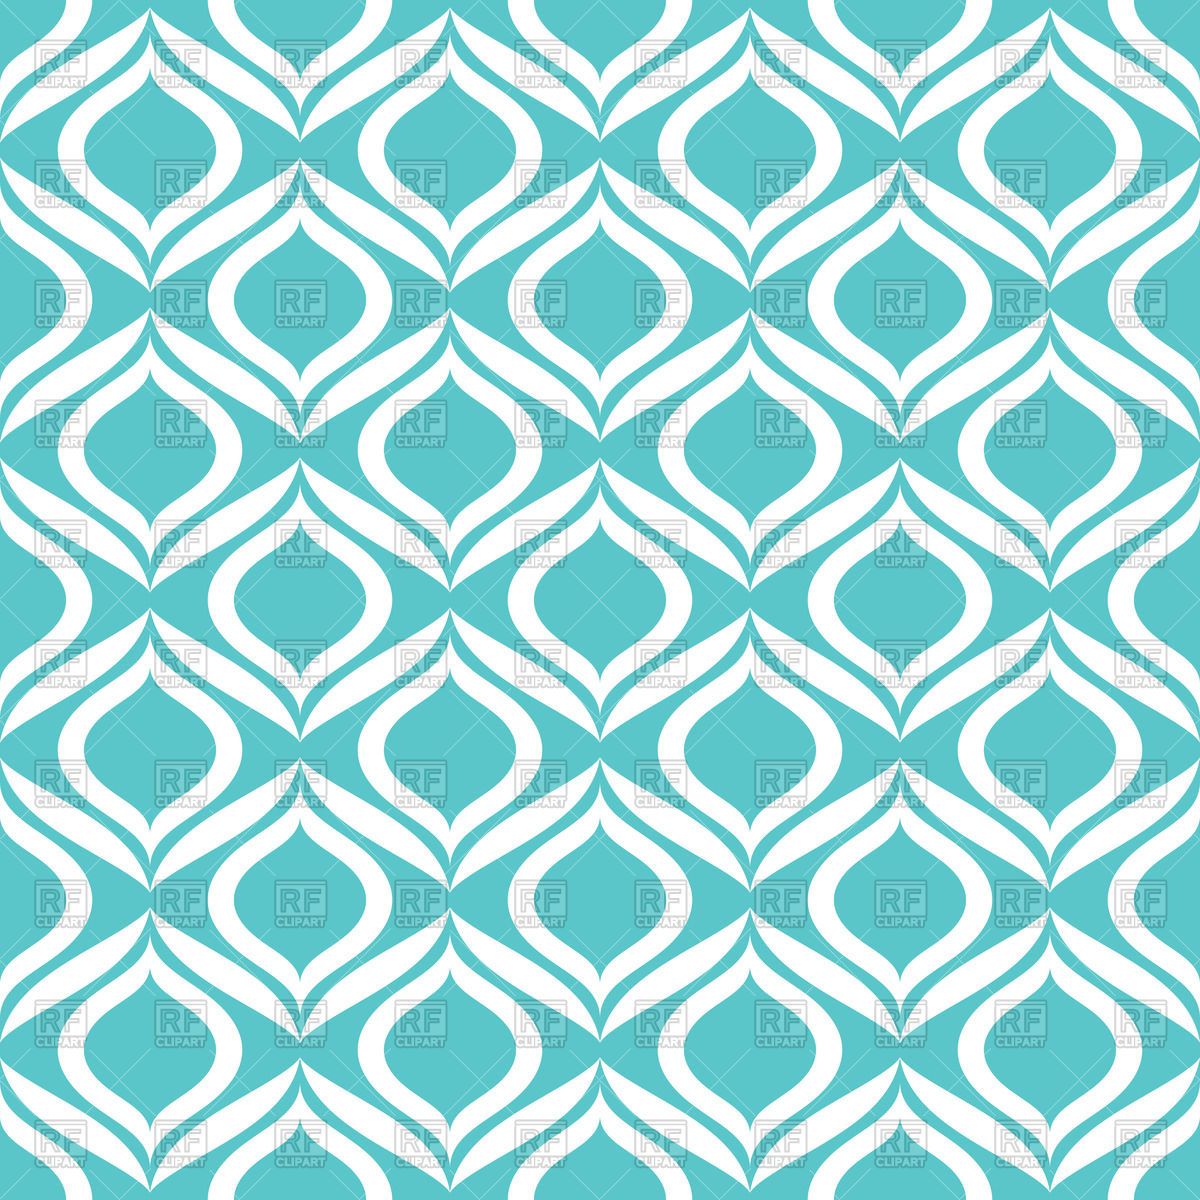 Seamless Simple Abstract Geometric Wallpaper Vector